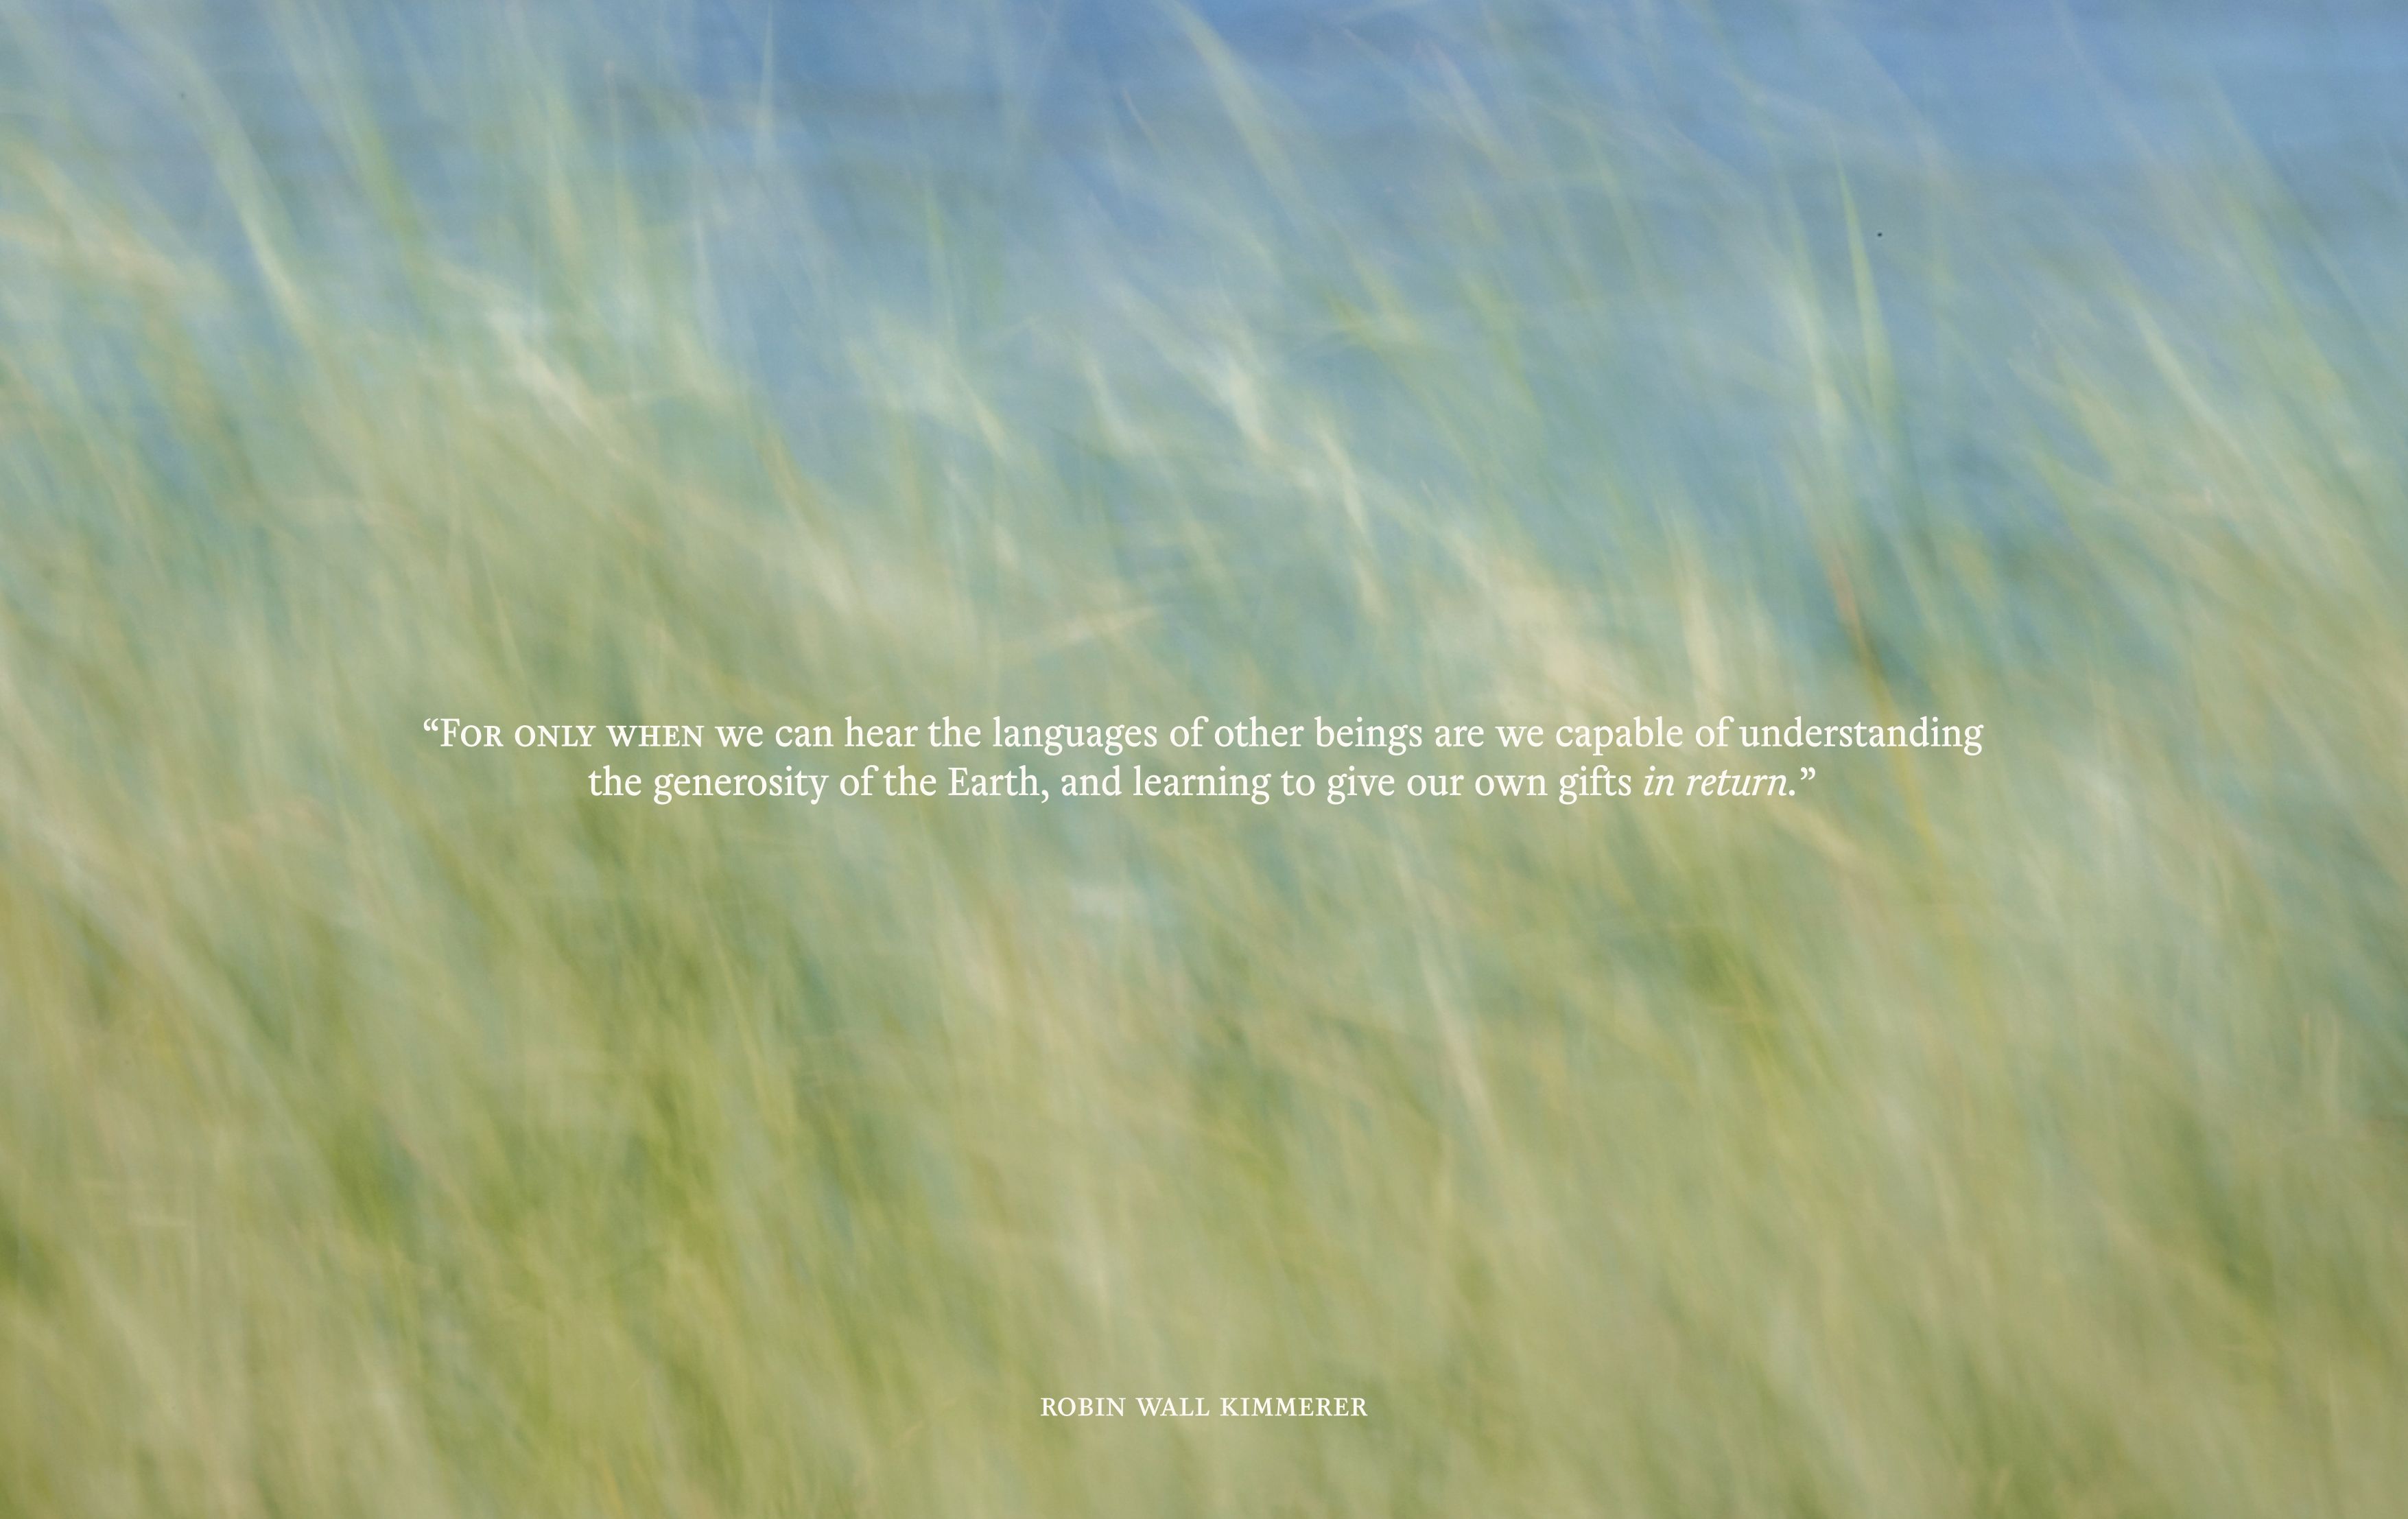 Blurry image of field with a quote from Robin Wall Kimmerer over the top: “For only when we can hear the languages of other beings are we capable of understanding the generosity of the Earth, and learning to give our own gifts in return”